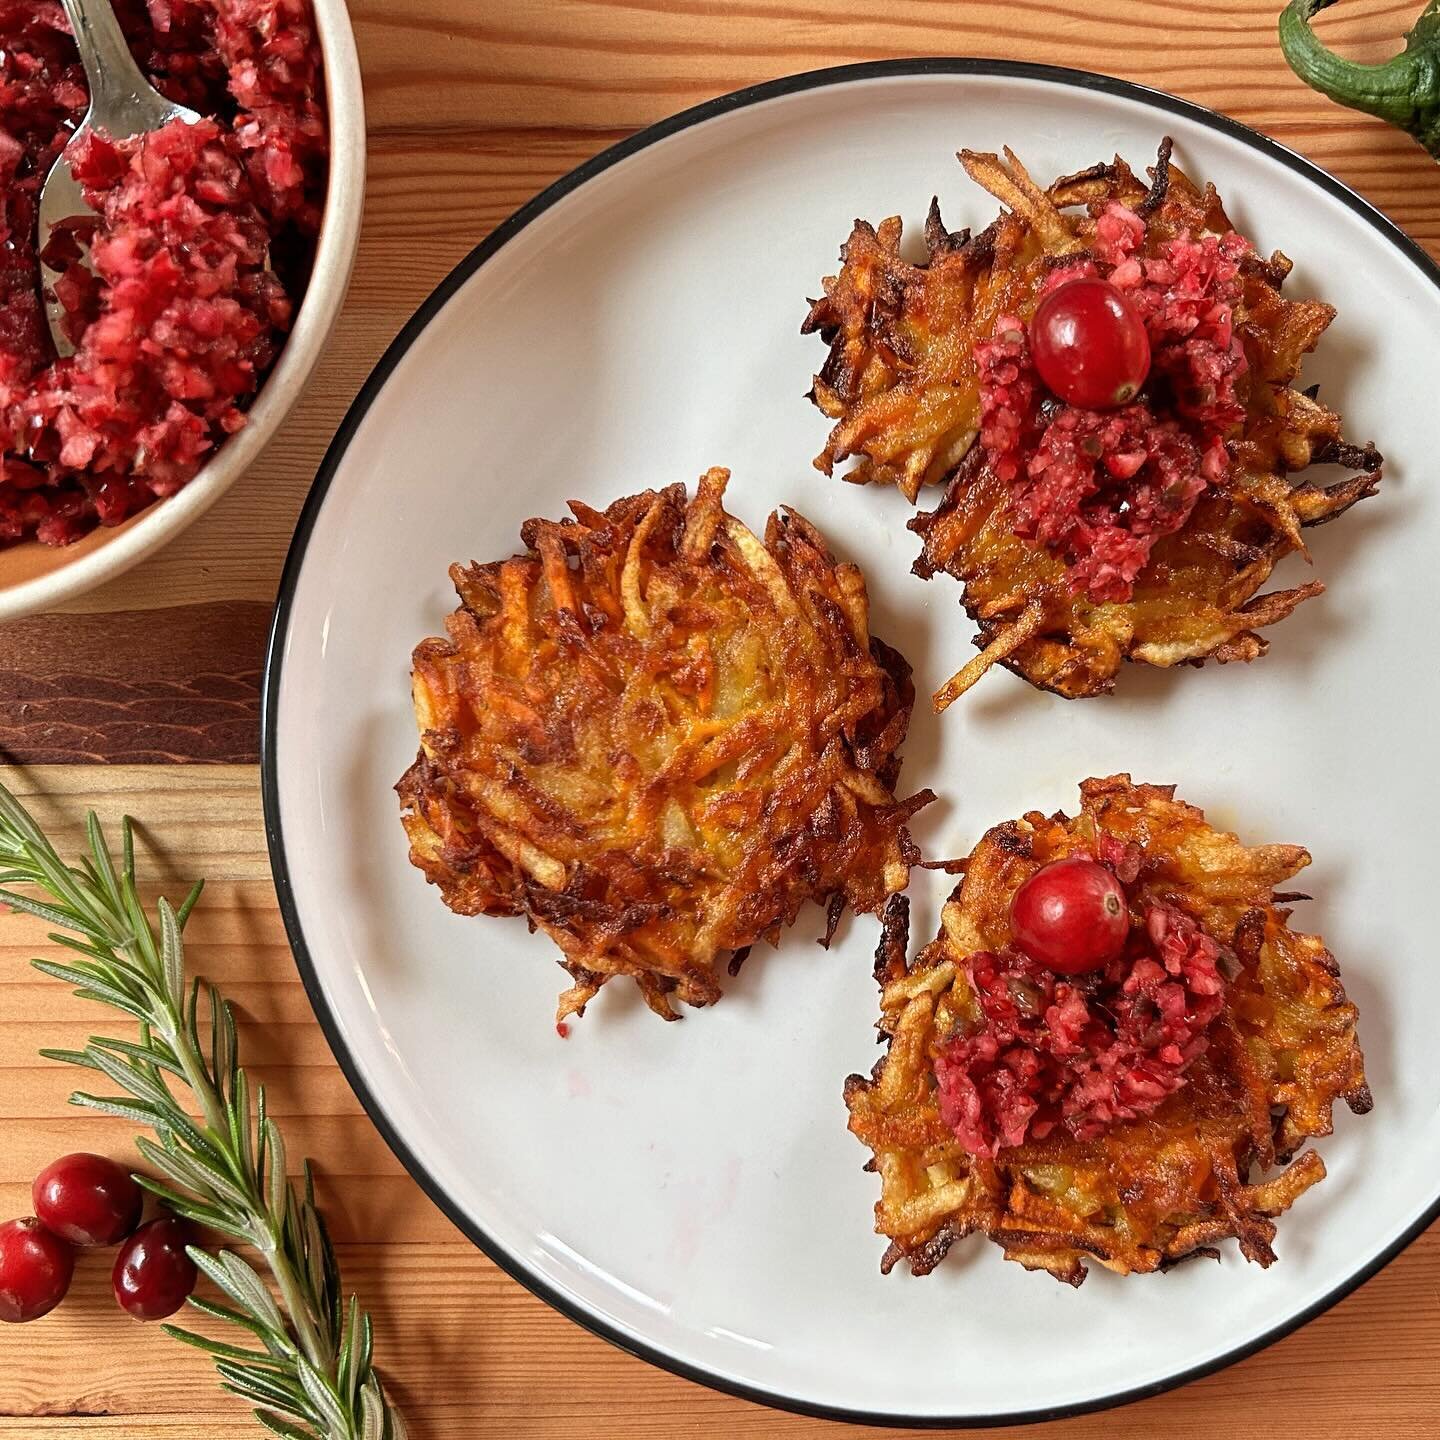 The first night of Hanukkah &mdash; may it bring in more light in more forms than we can even imagine. 

Recipe for sweet potato (with potato) #latkes topped with cranberry salsa is up now - link in profile. Very into all things cranberry, and this s